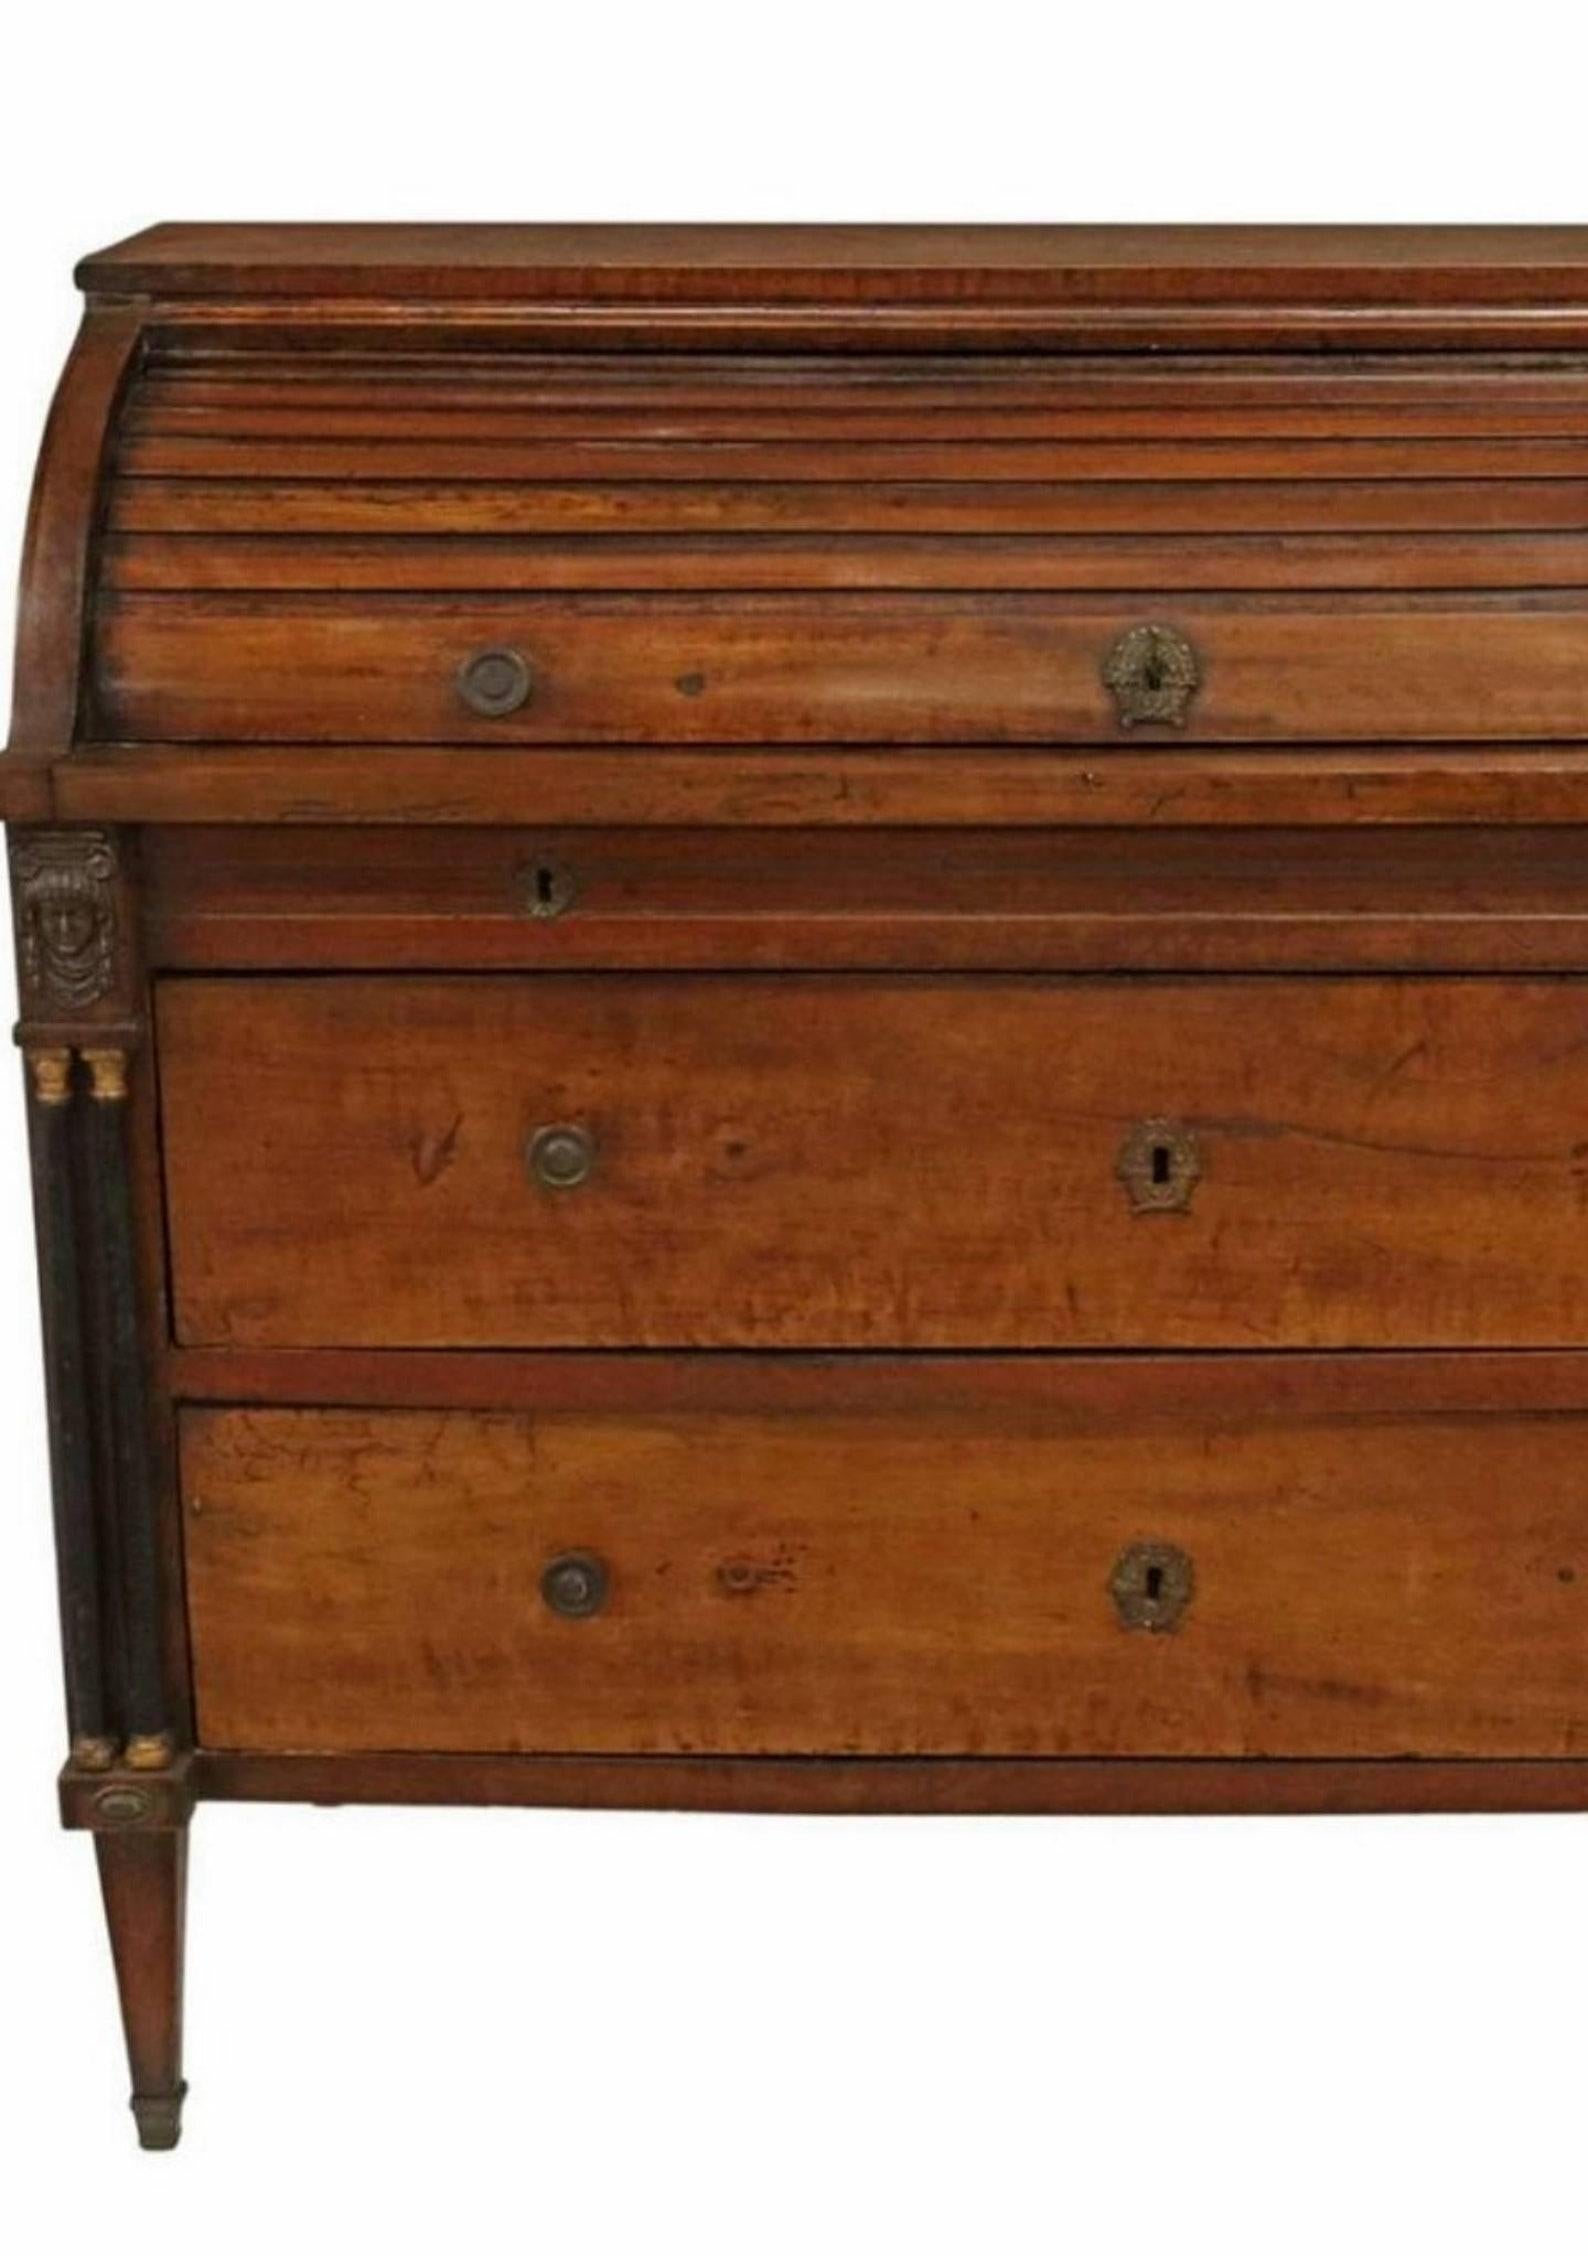 Early 19th Century French Empire Period Bureau a Cylindre Gentleman's Desk For Sale 1